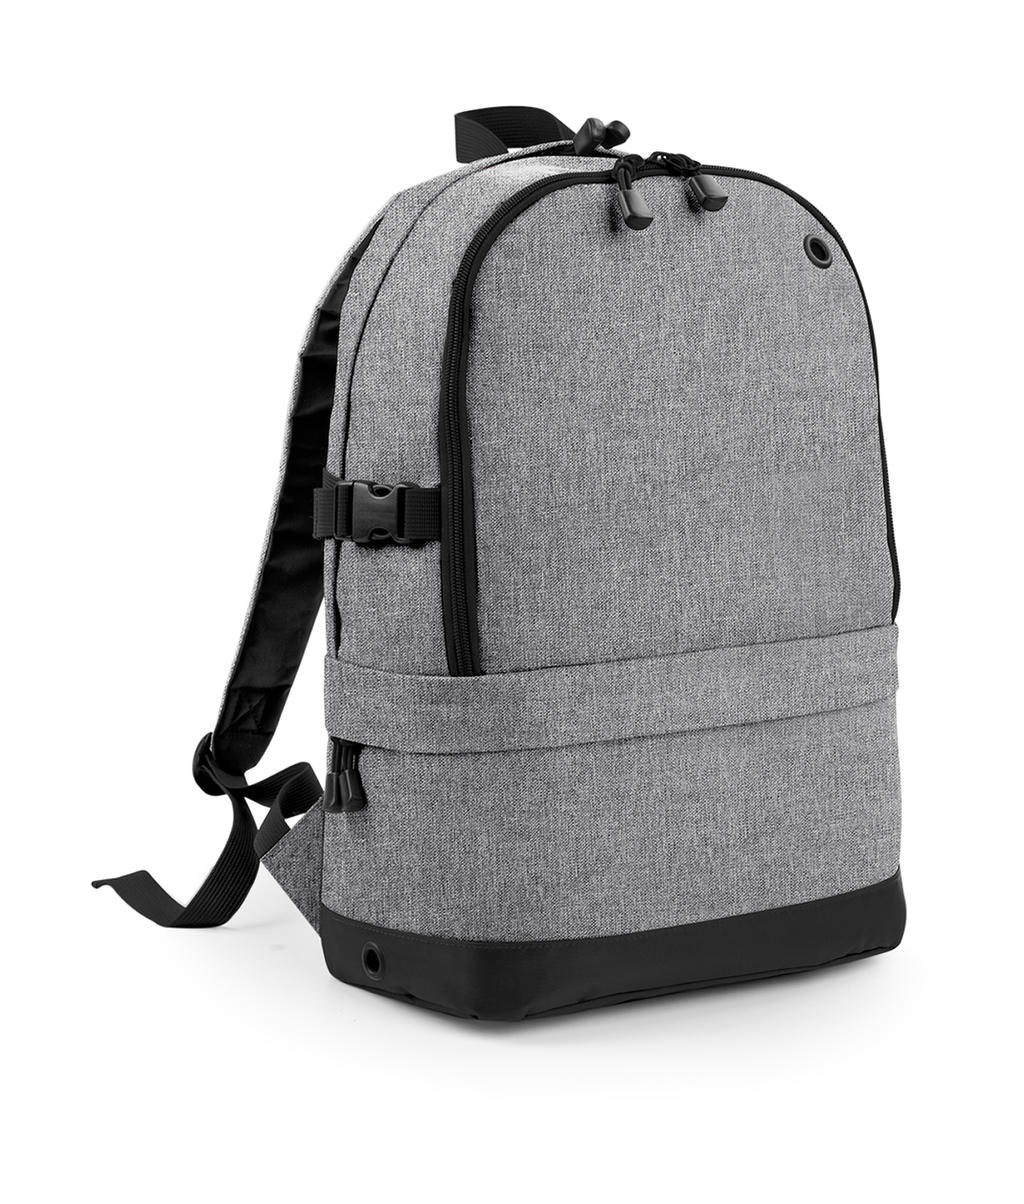  Athleisure Pro Backpack in Farbe Grey Marl